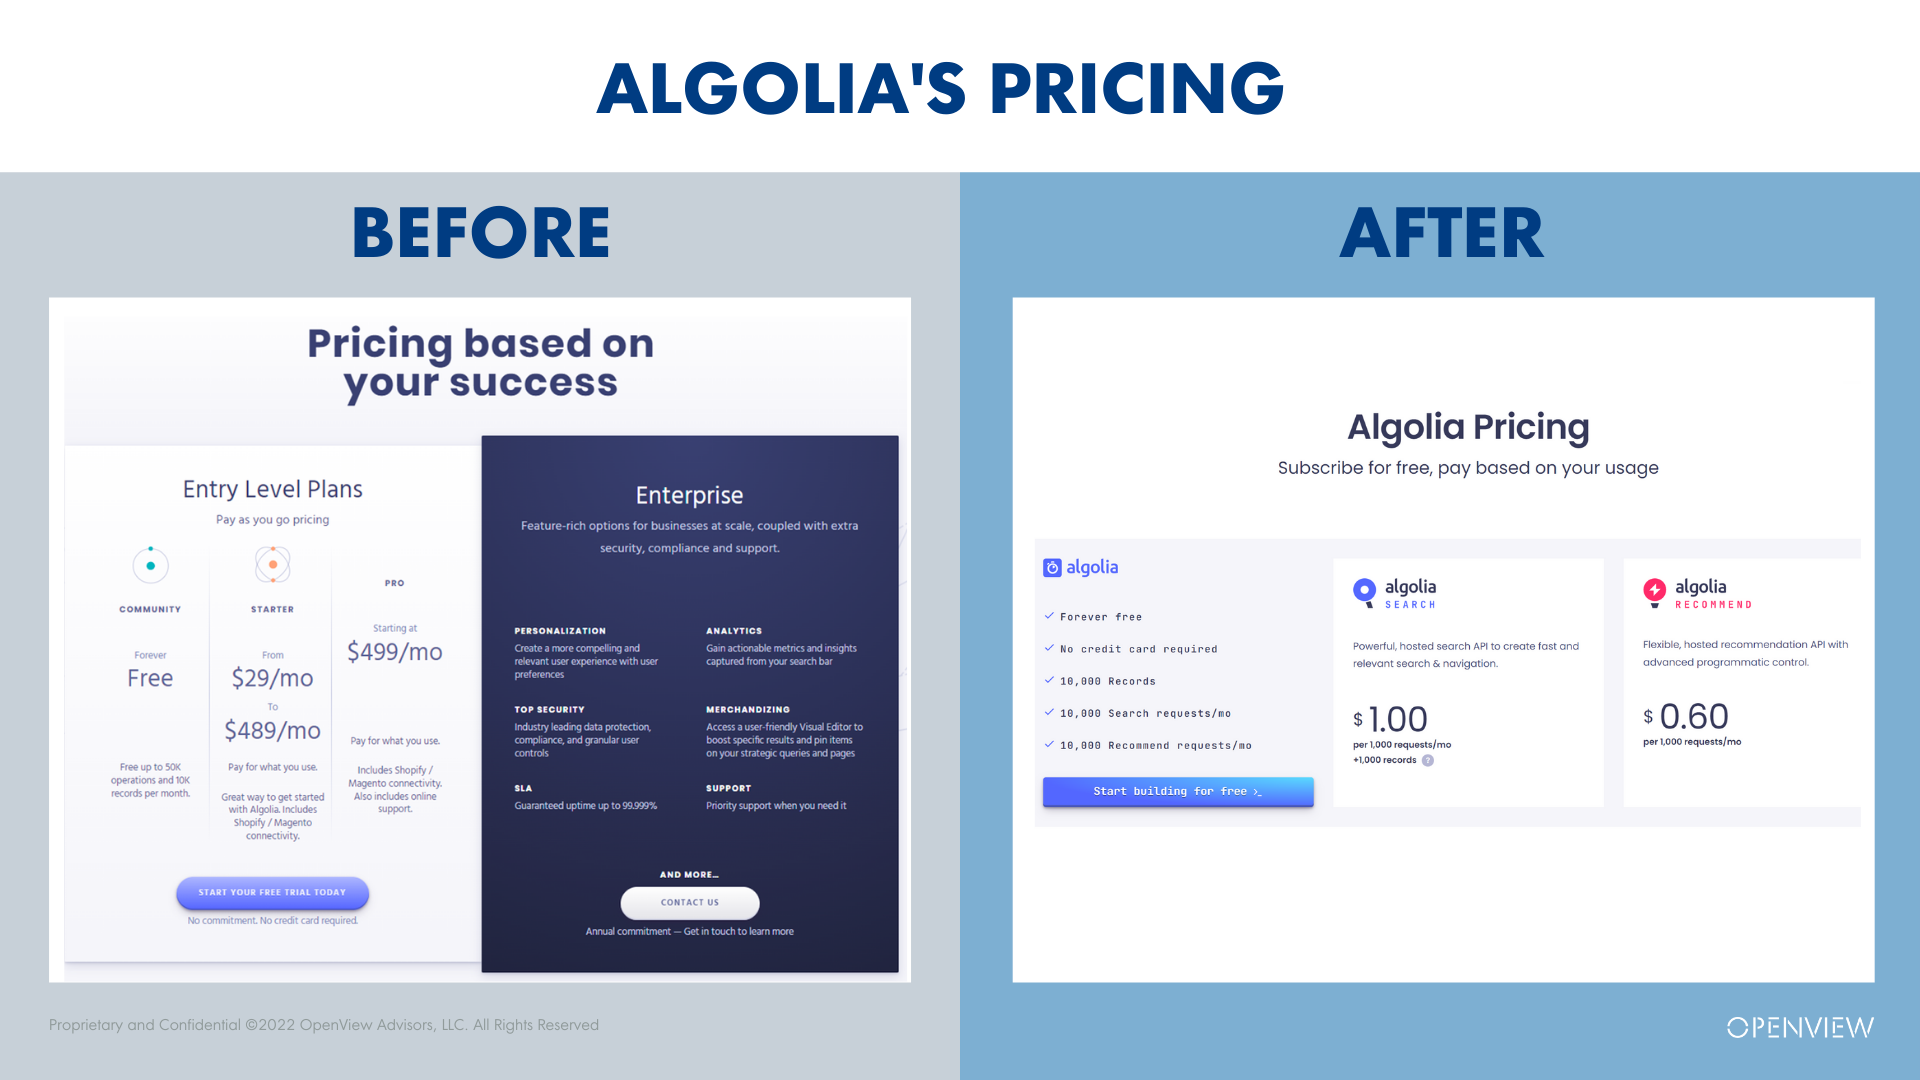 OpenView_Stories of Scaling with Usage-Based Pricing_Algolia Pricing